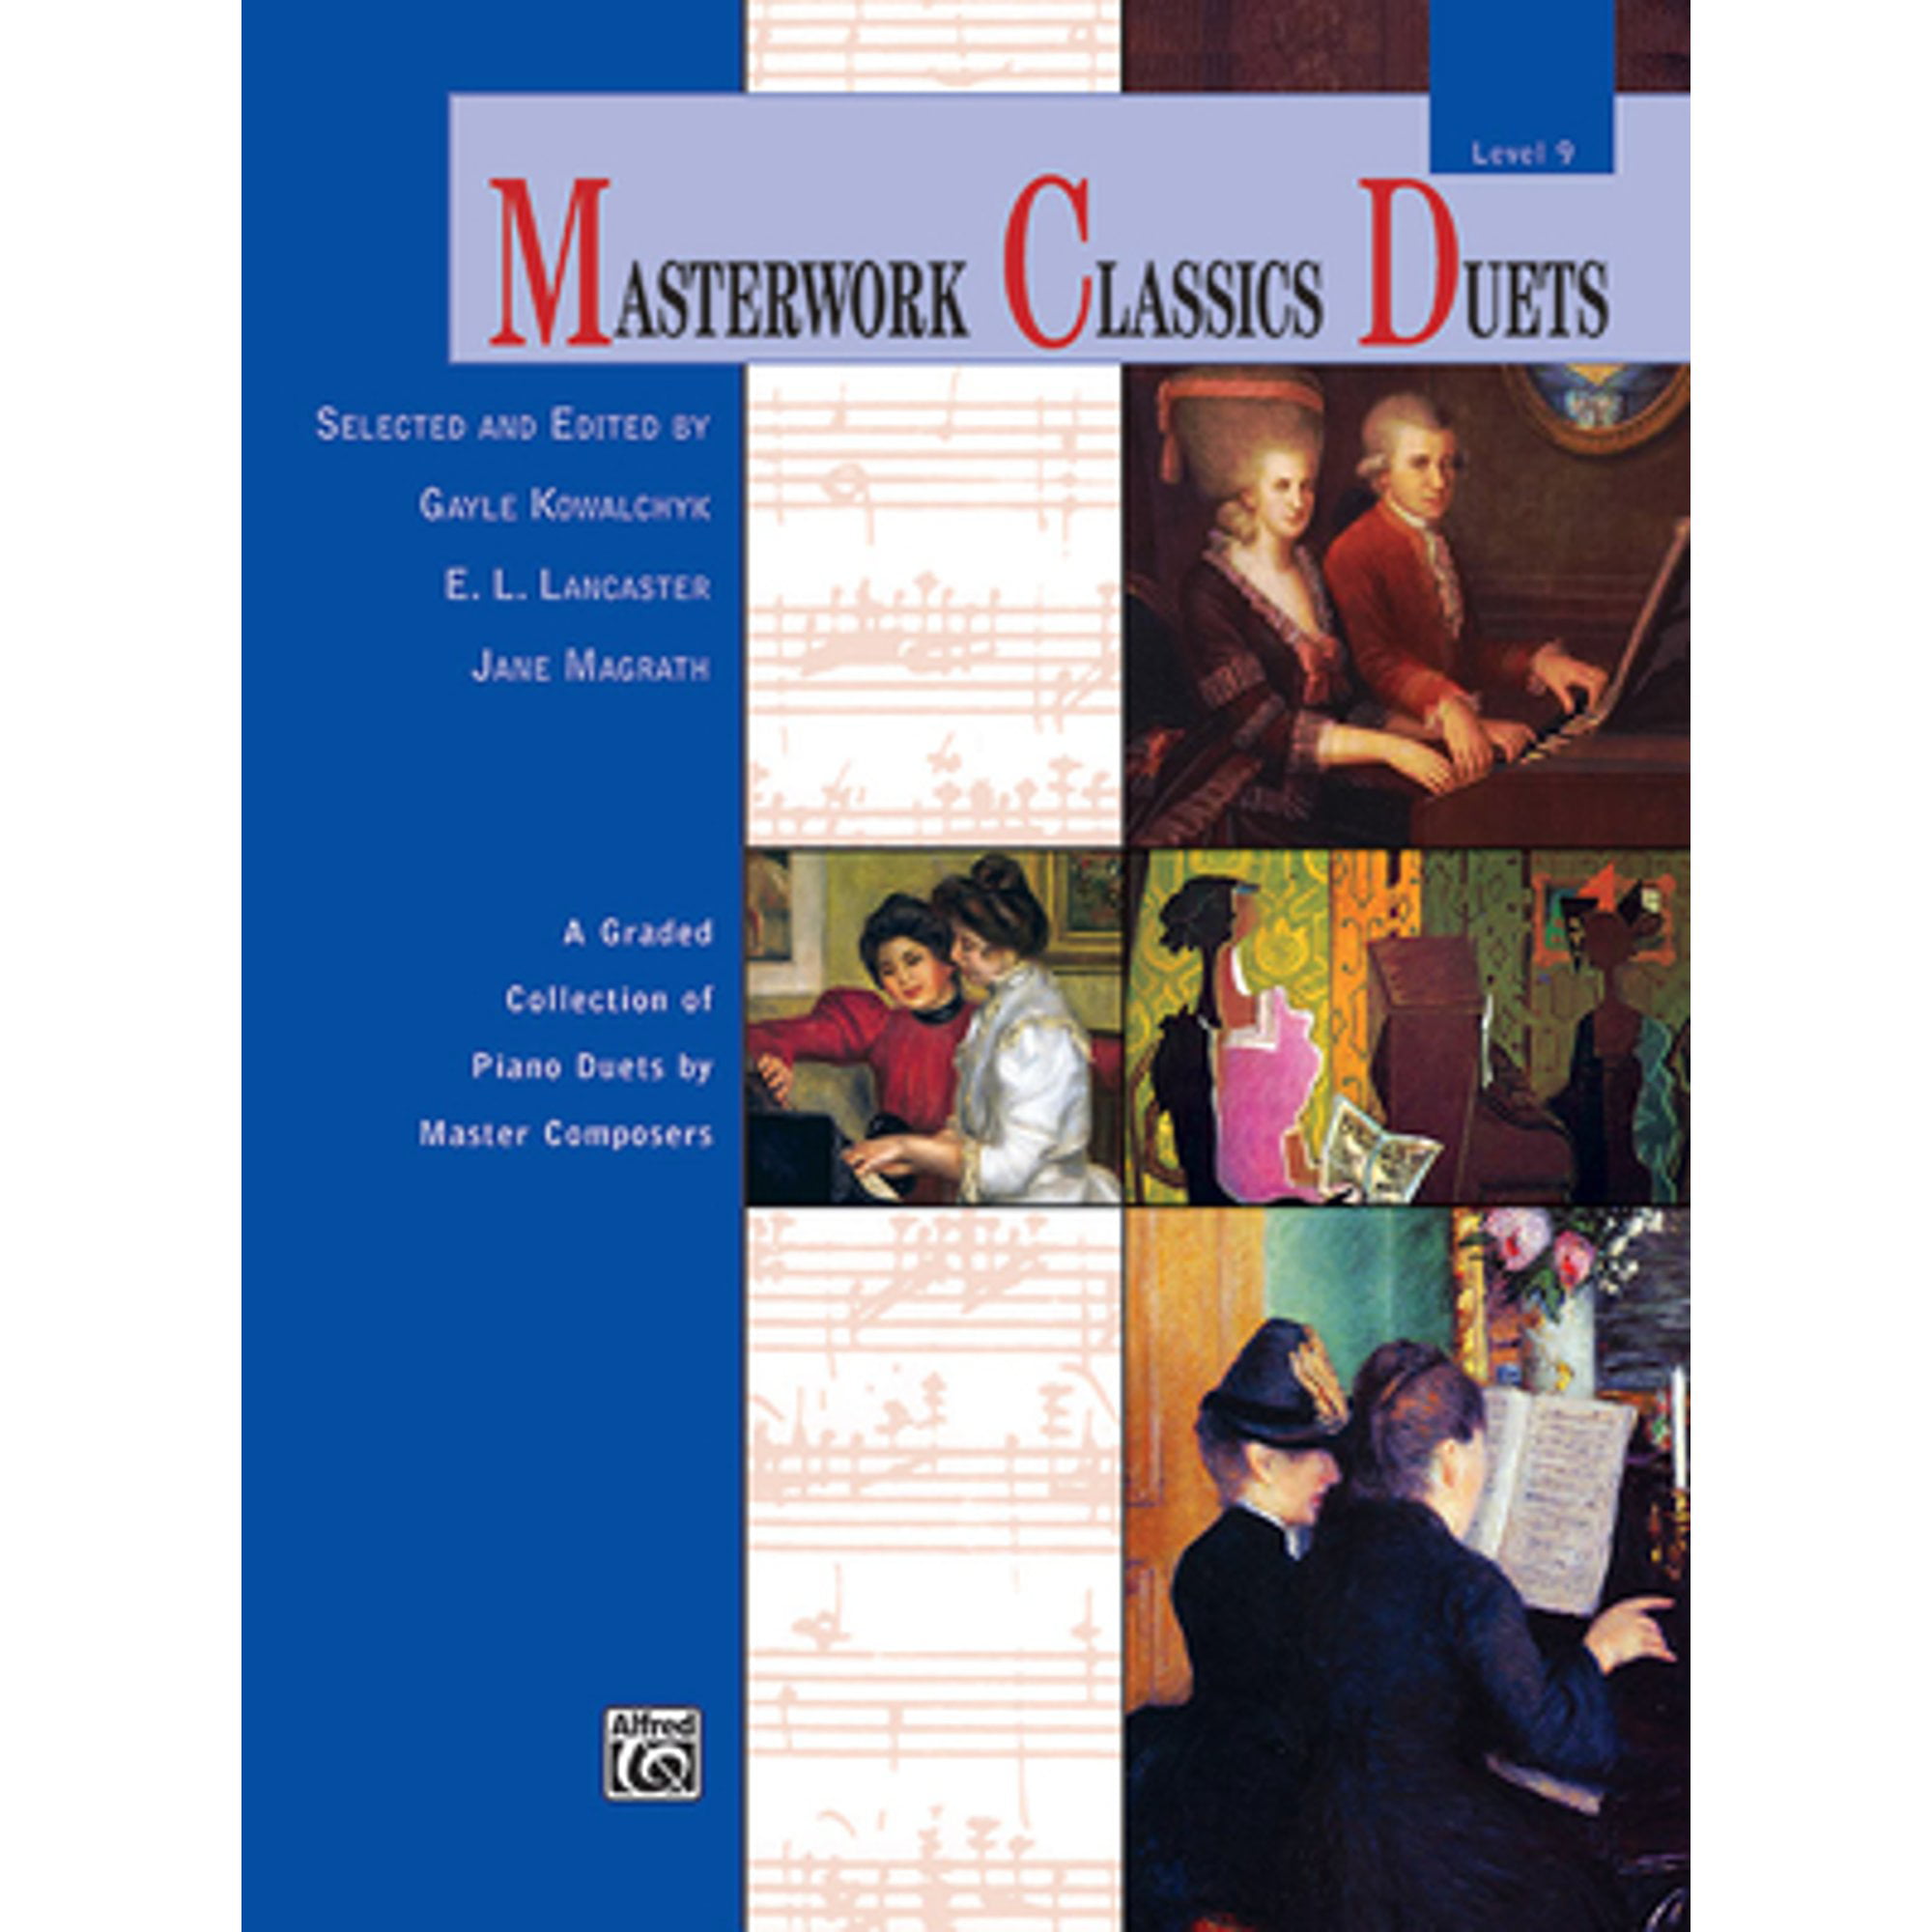 Pre-Owned Masterwork Classics Duets, Level 9: A Graded Collection of Piano Duets by Master Composers (Paperback 9780739097205) Gayle Kowalchyk, E L Lancaster, Jane Magrath